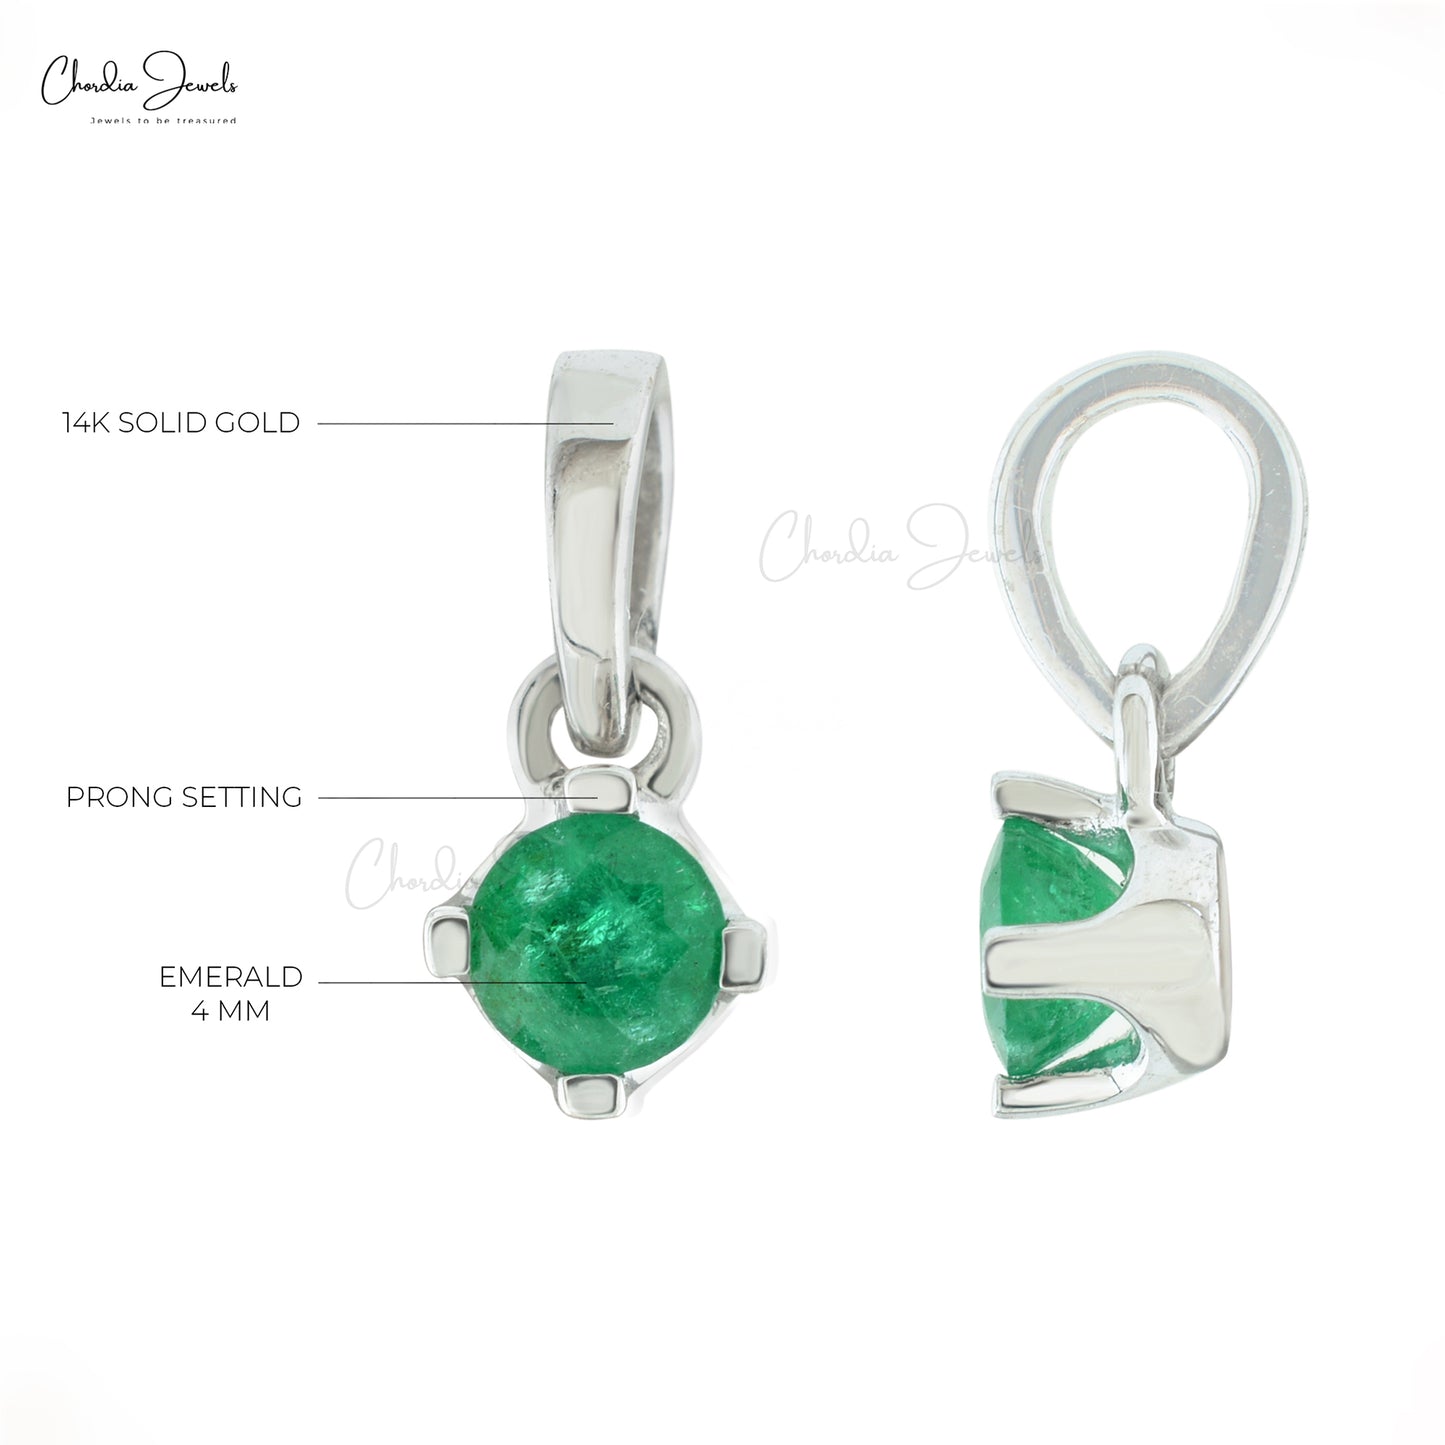 Natural Green Emerald 4mm Brilliant Round Cut Gemstone Pendant 14k Solid White Gold Prong Set Pendant For Her